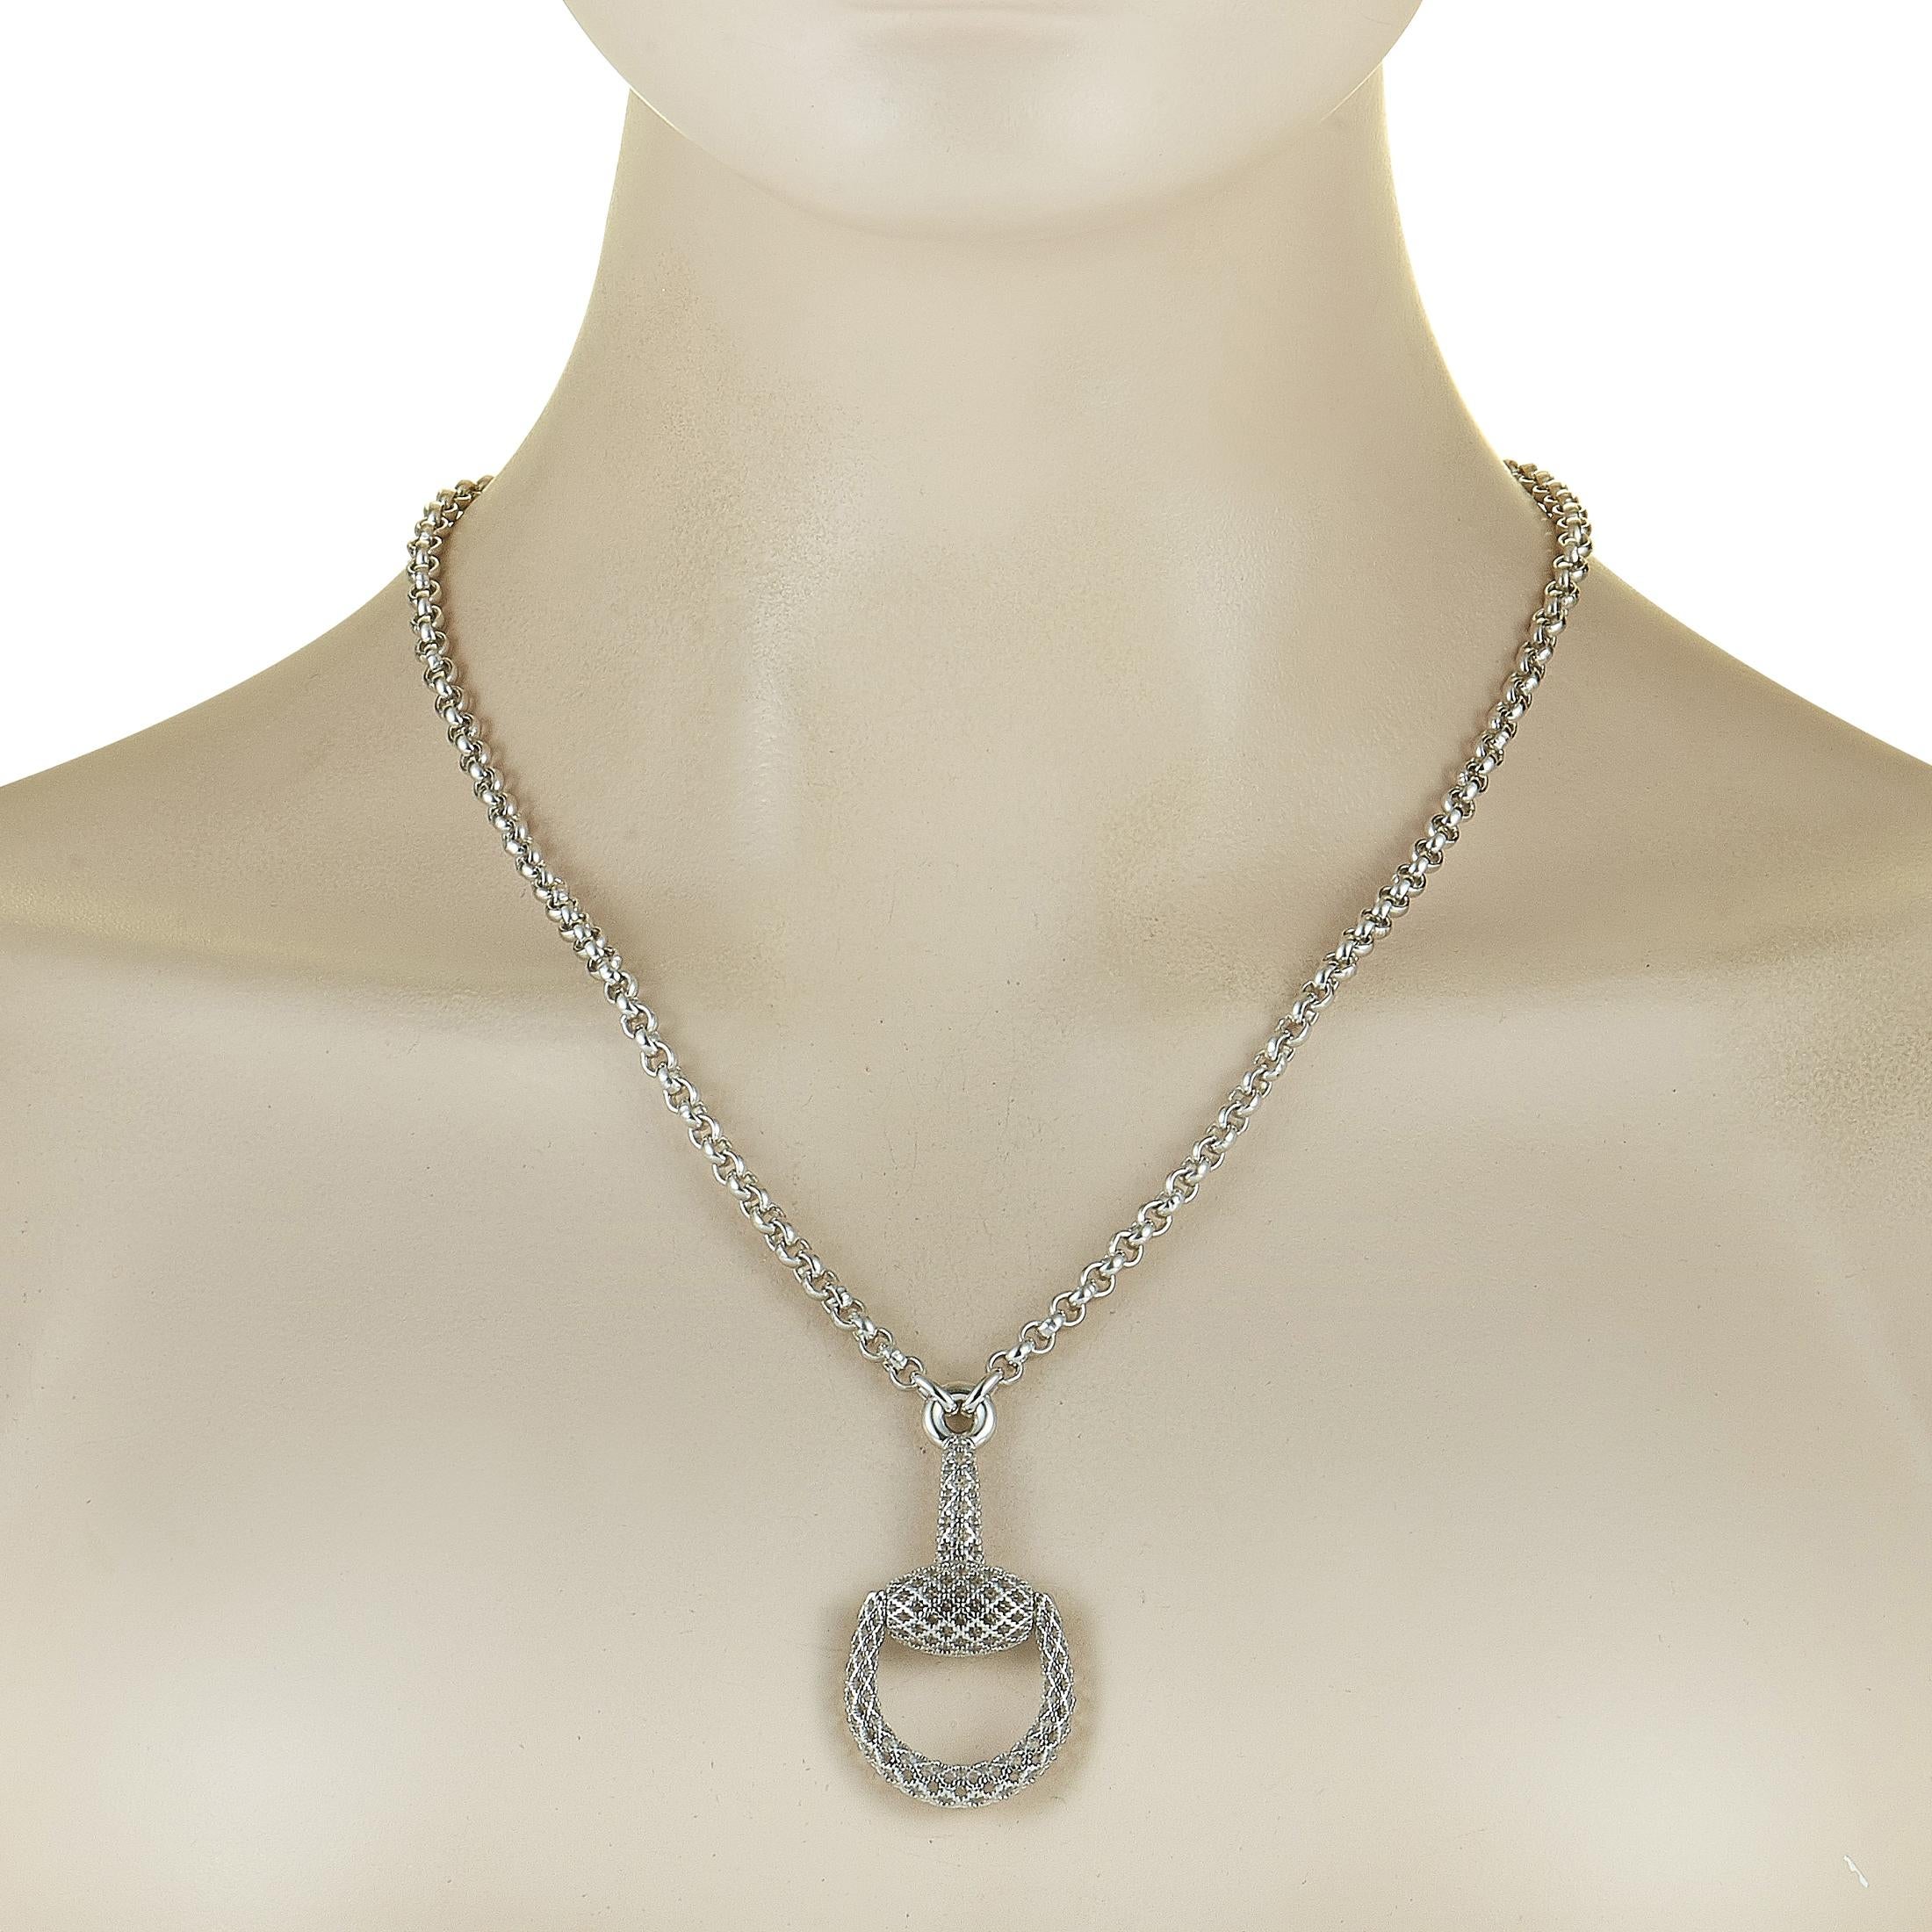 The Gucci “Horsebit” necklace is crafted from silver and weighs 41 grams. The necklace is presented with a 20” chain and a pendant that measures 2.12” in length and 1” in width.
 
 This jewelry piece is offered in brand new condition and includes